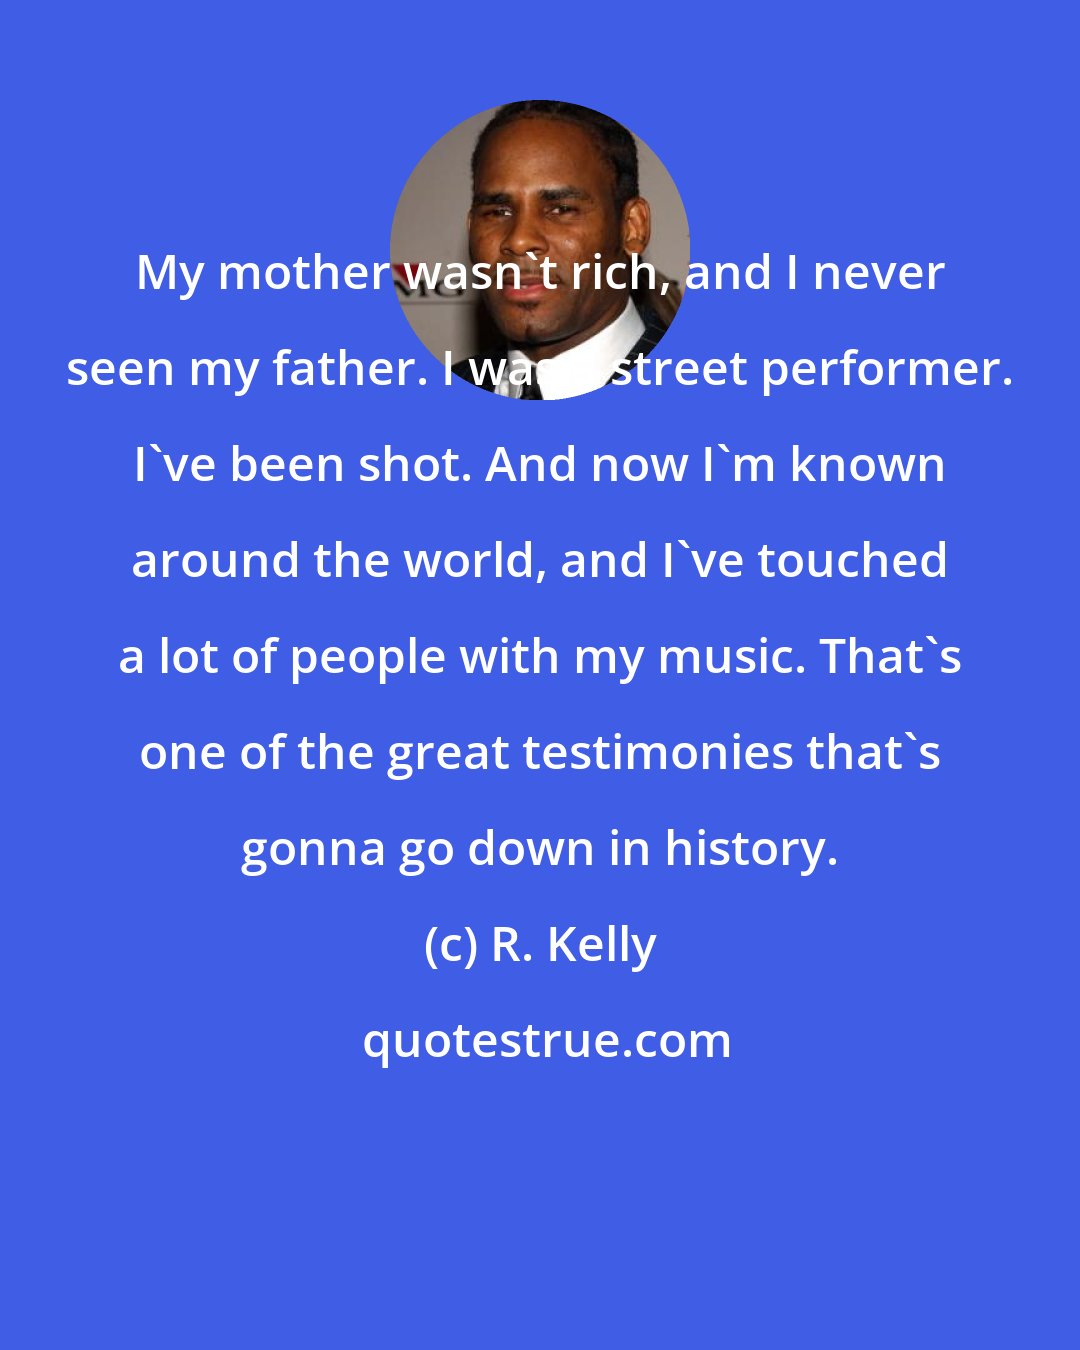 R. Kelly: My mother wasn't rich, and I never seen my father. I was a street performer. I've been shot. And now I'm known around the world, and I've touched a lot of people with my music. That's one of the great testimonies that's gonna go down in history.